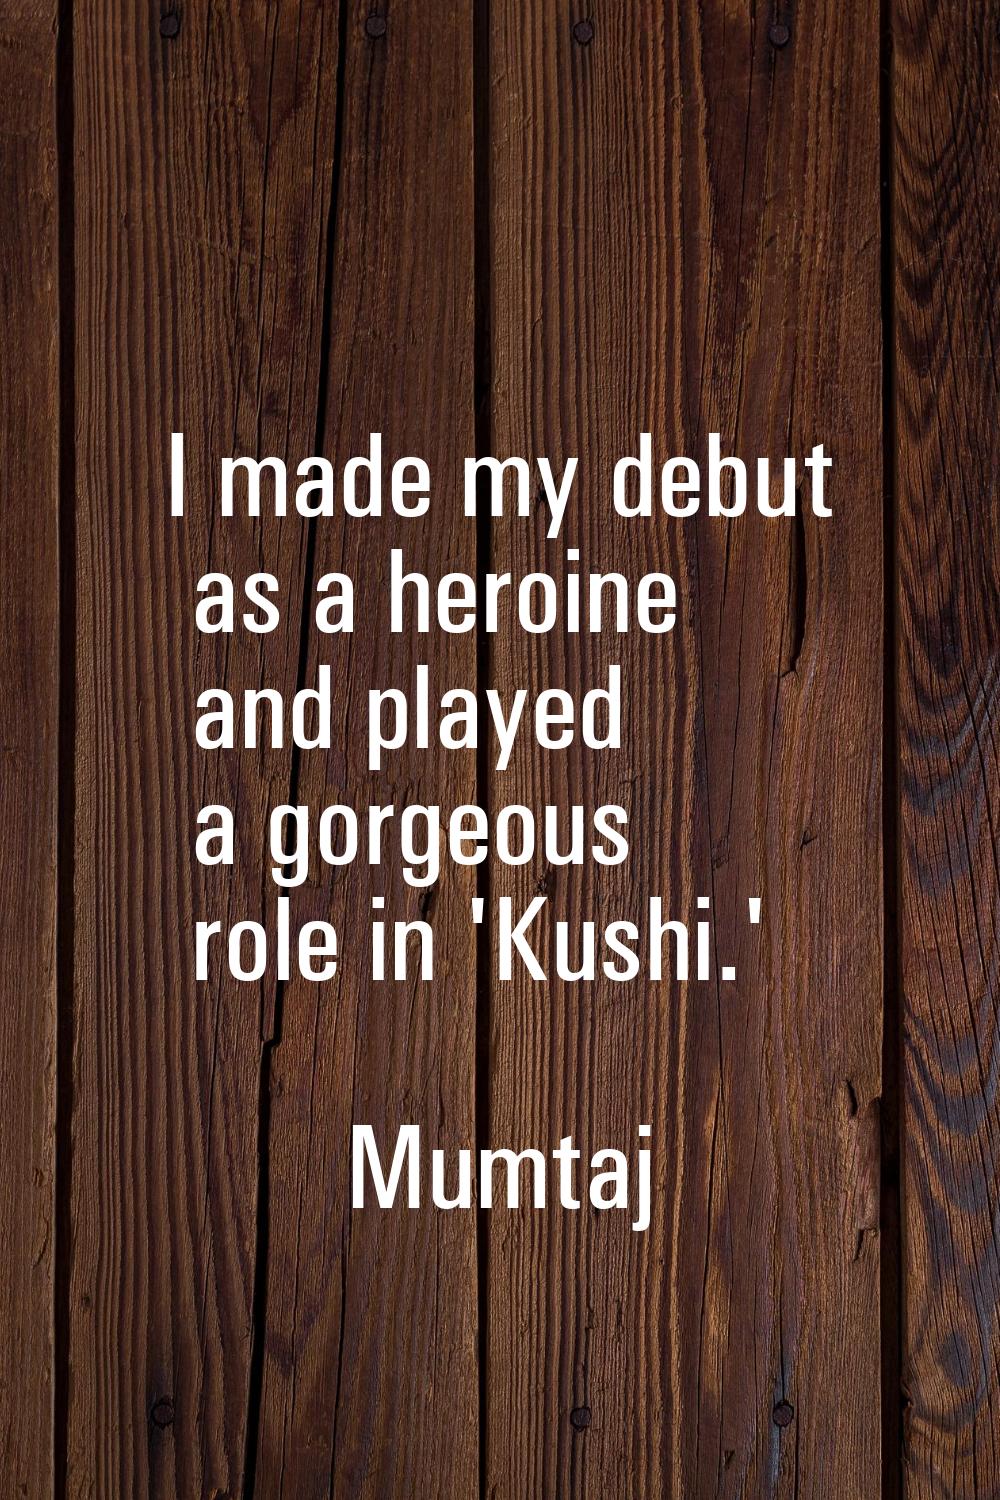 I made my debut as a heroine and played a gorgeous role in 'Kushi.'